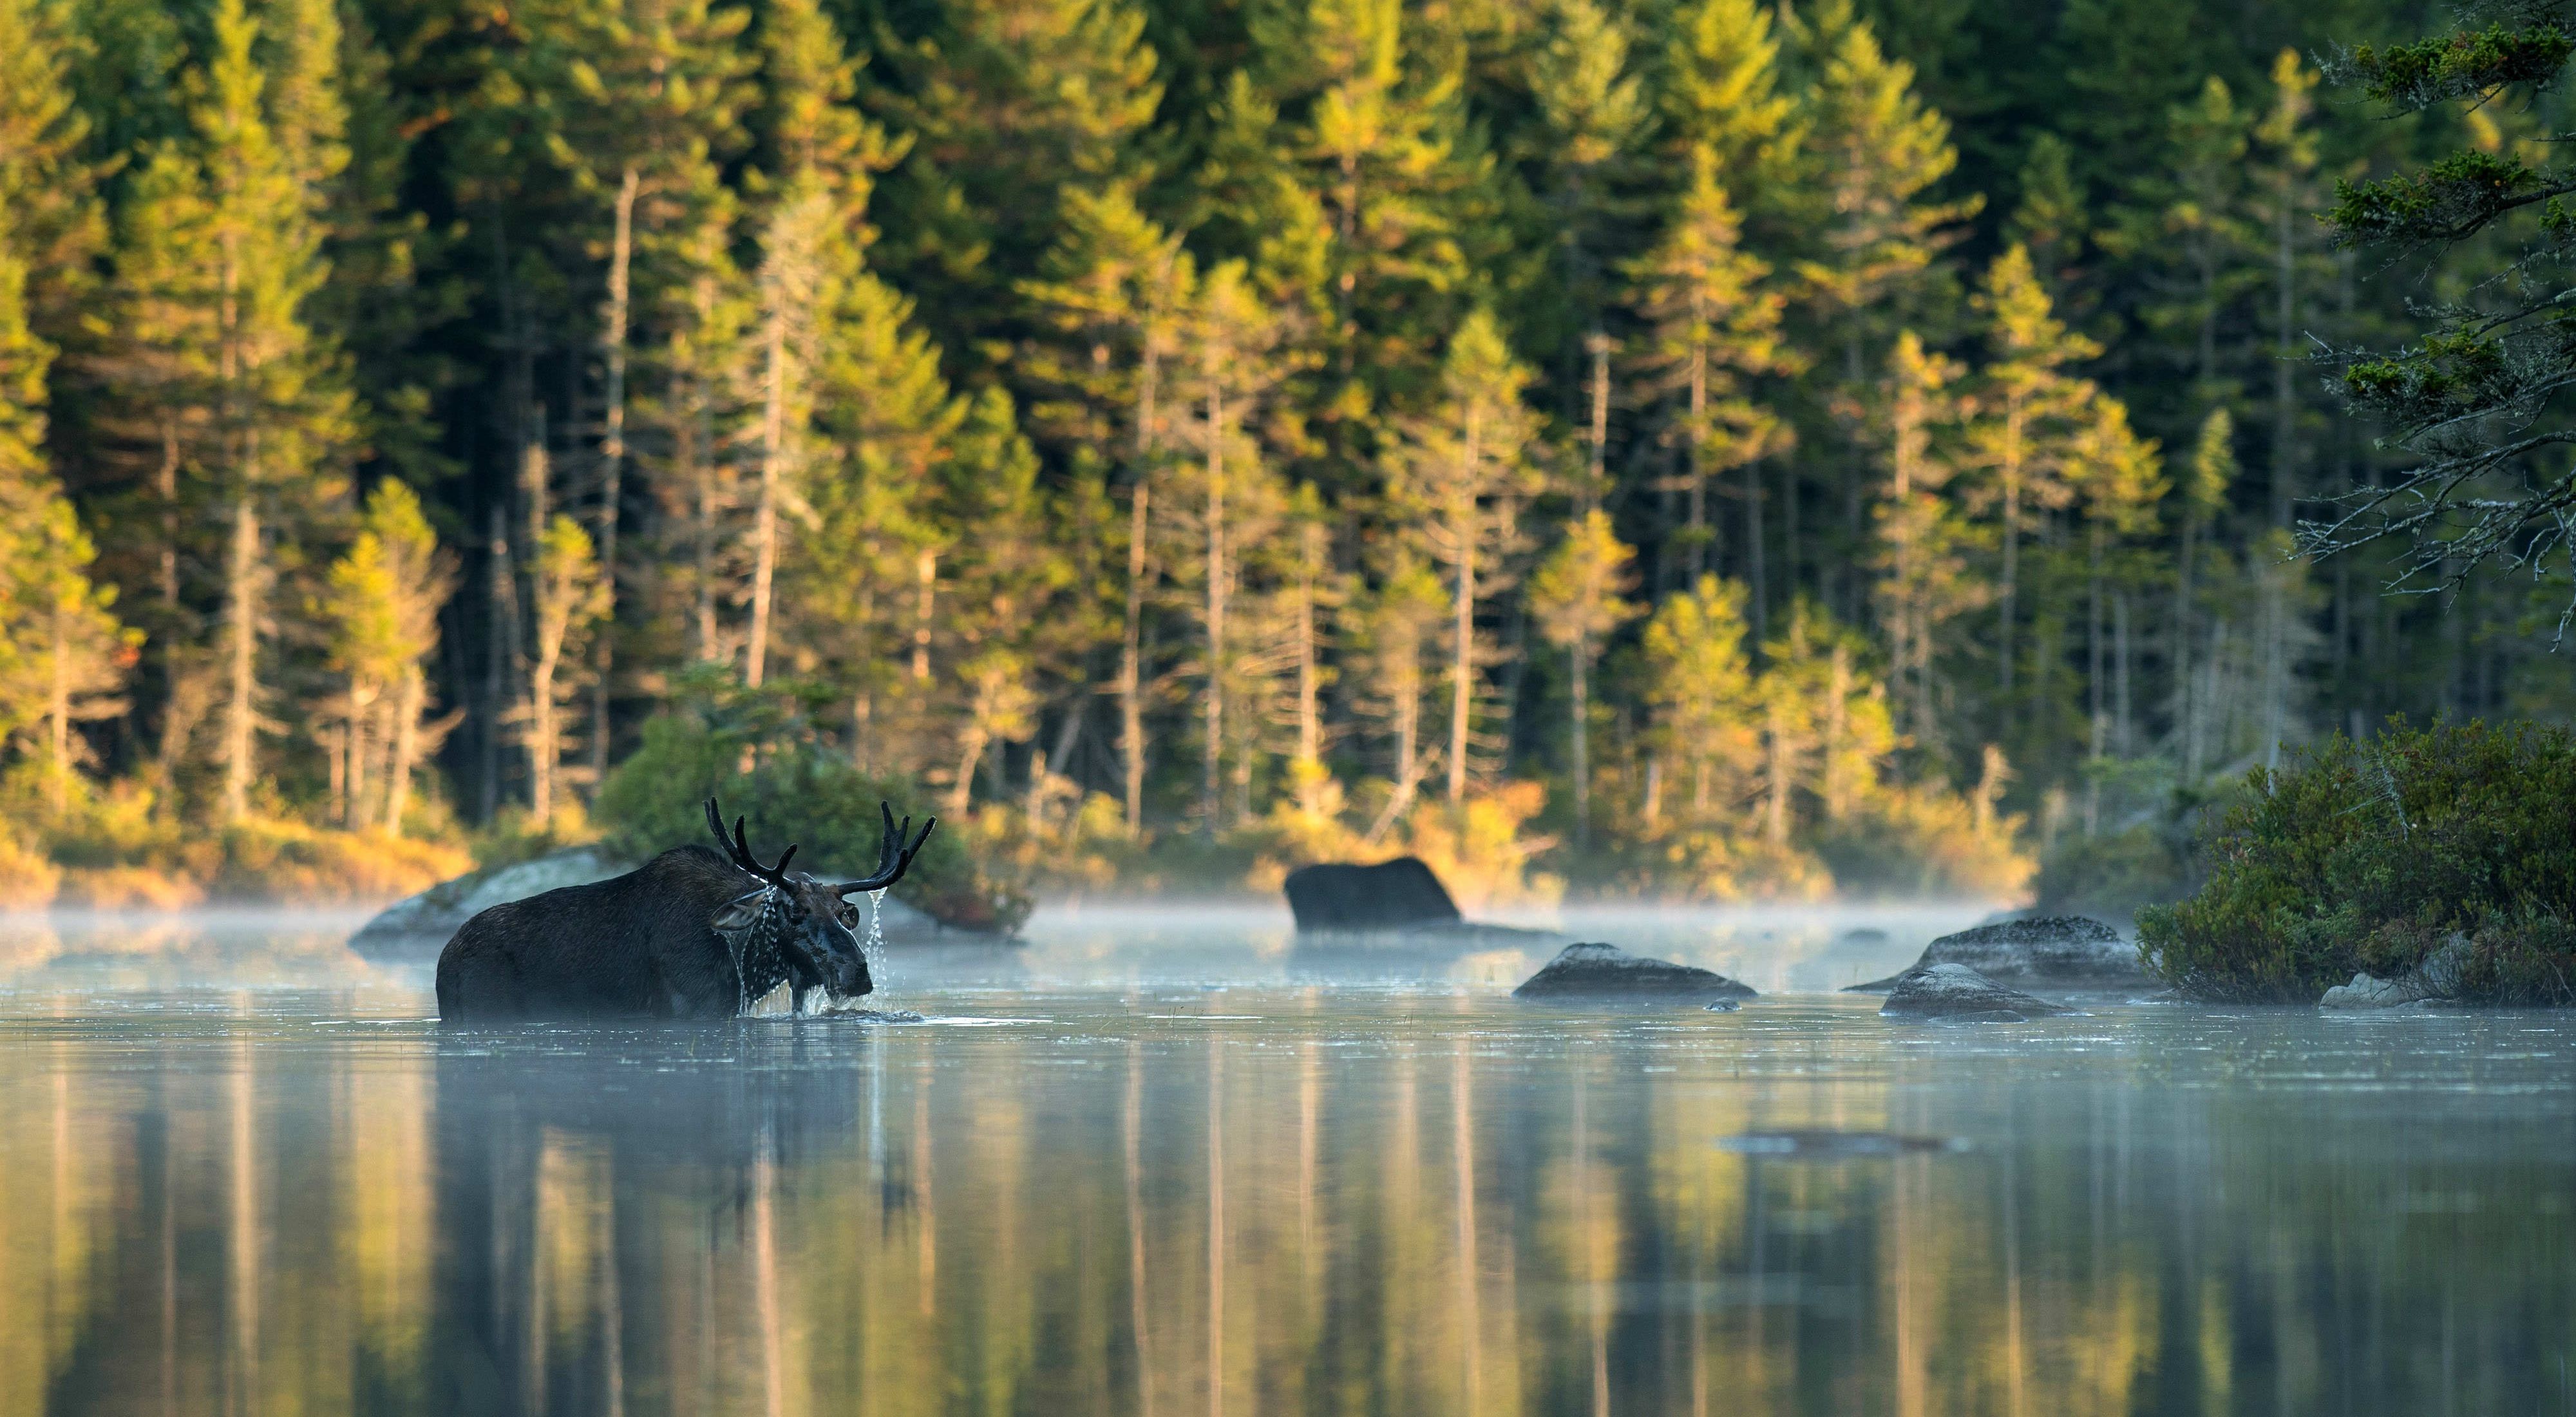 A moose wading chest-high in a river has water dripping from its antlers.